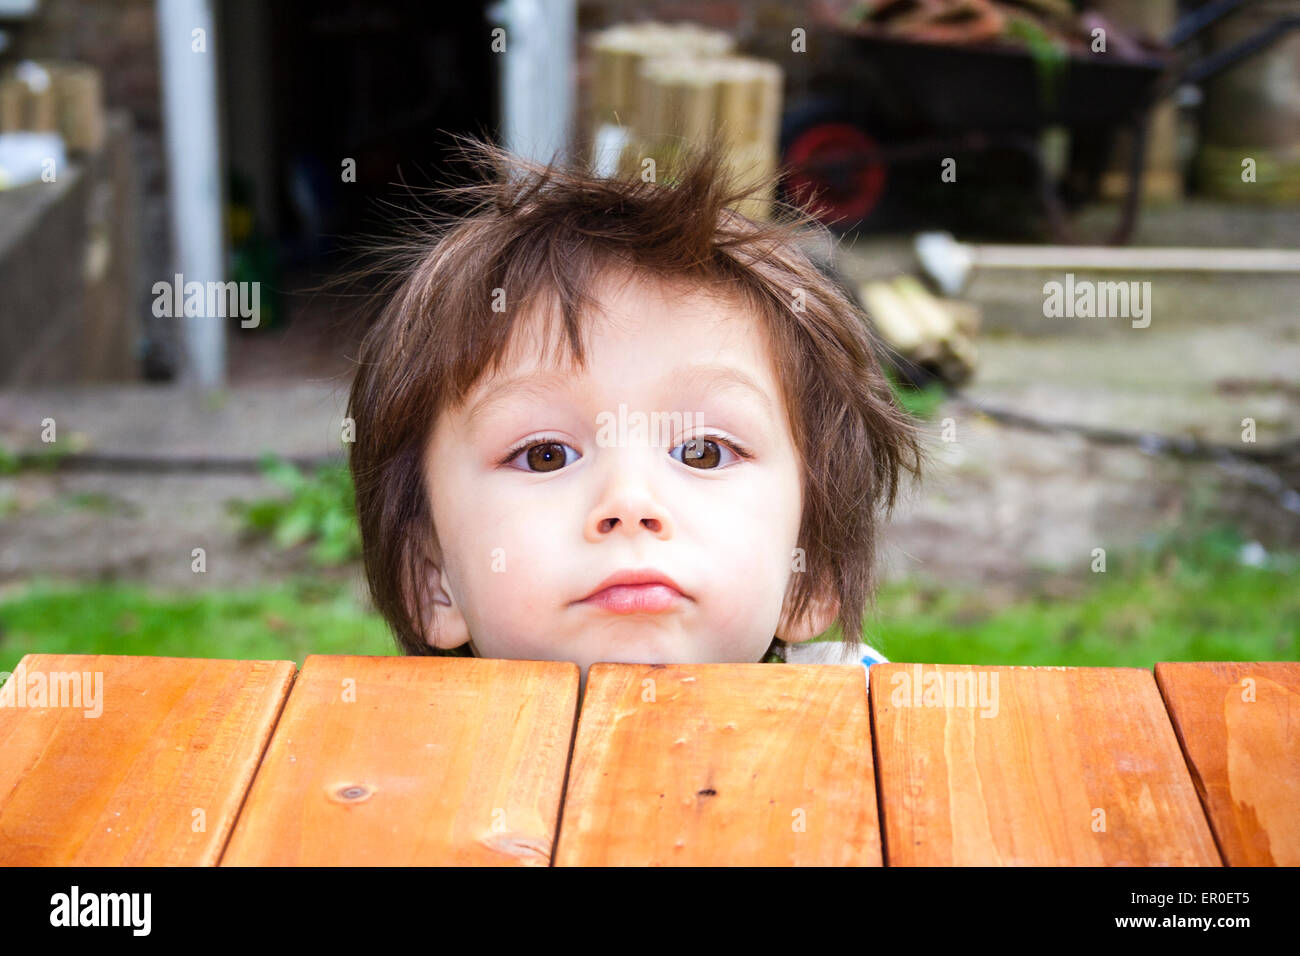 Close up of young child's face, boy, 3-4 year old, as he rests chin on wooden platform, facing and looking directly at viewer. Outdoors Stock Photo